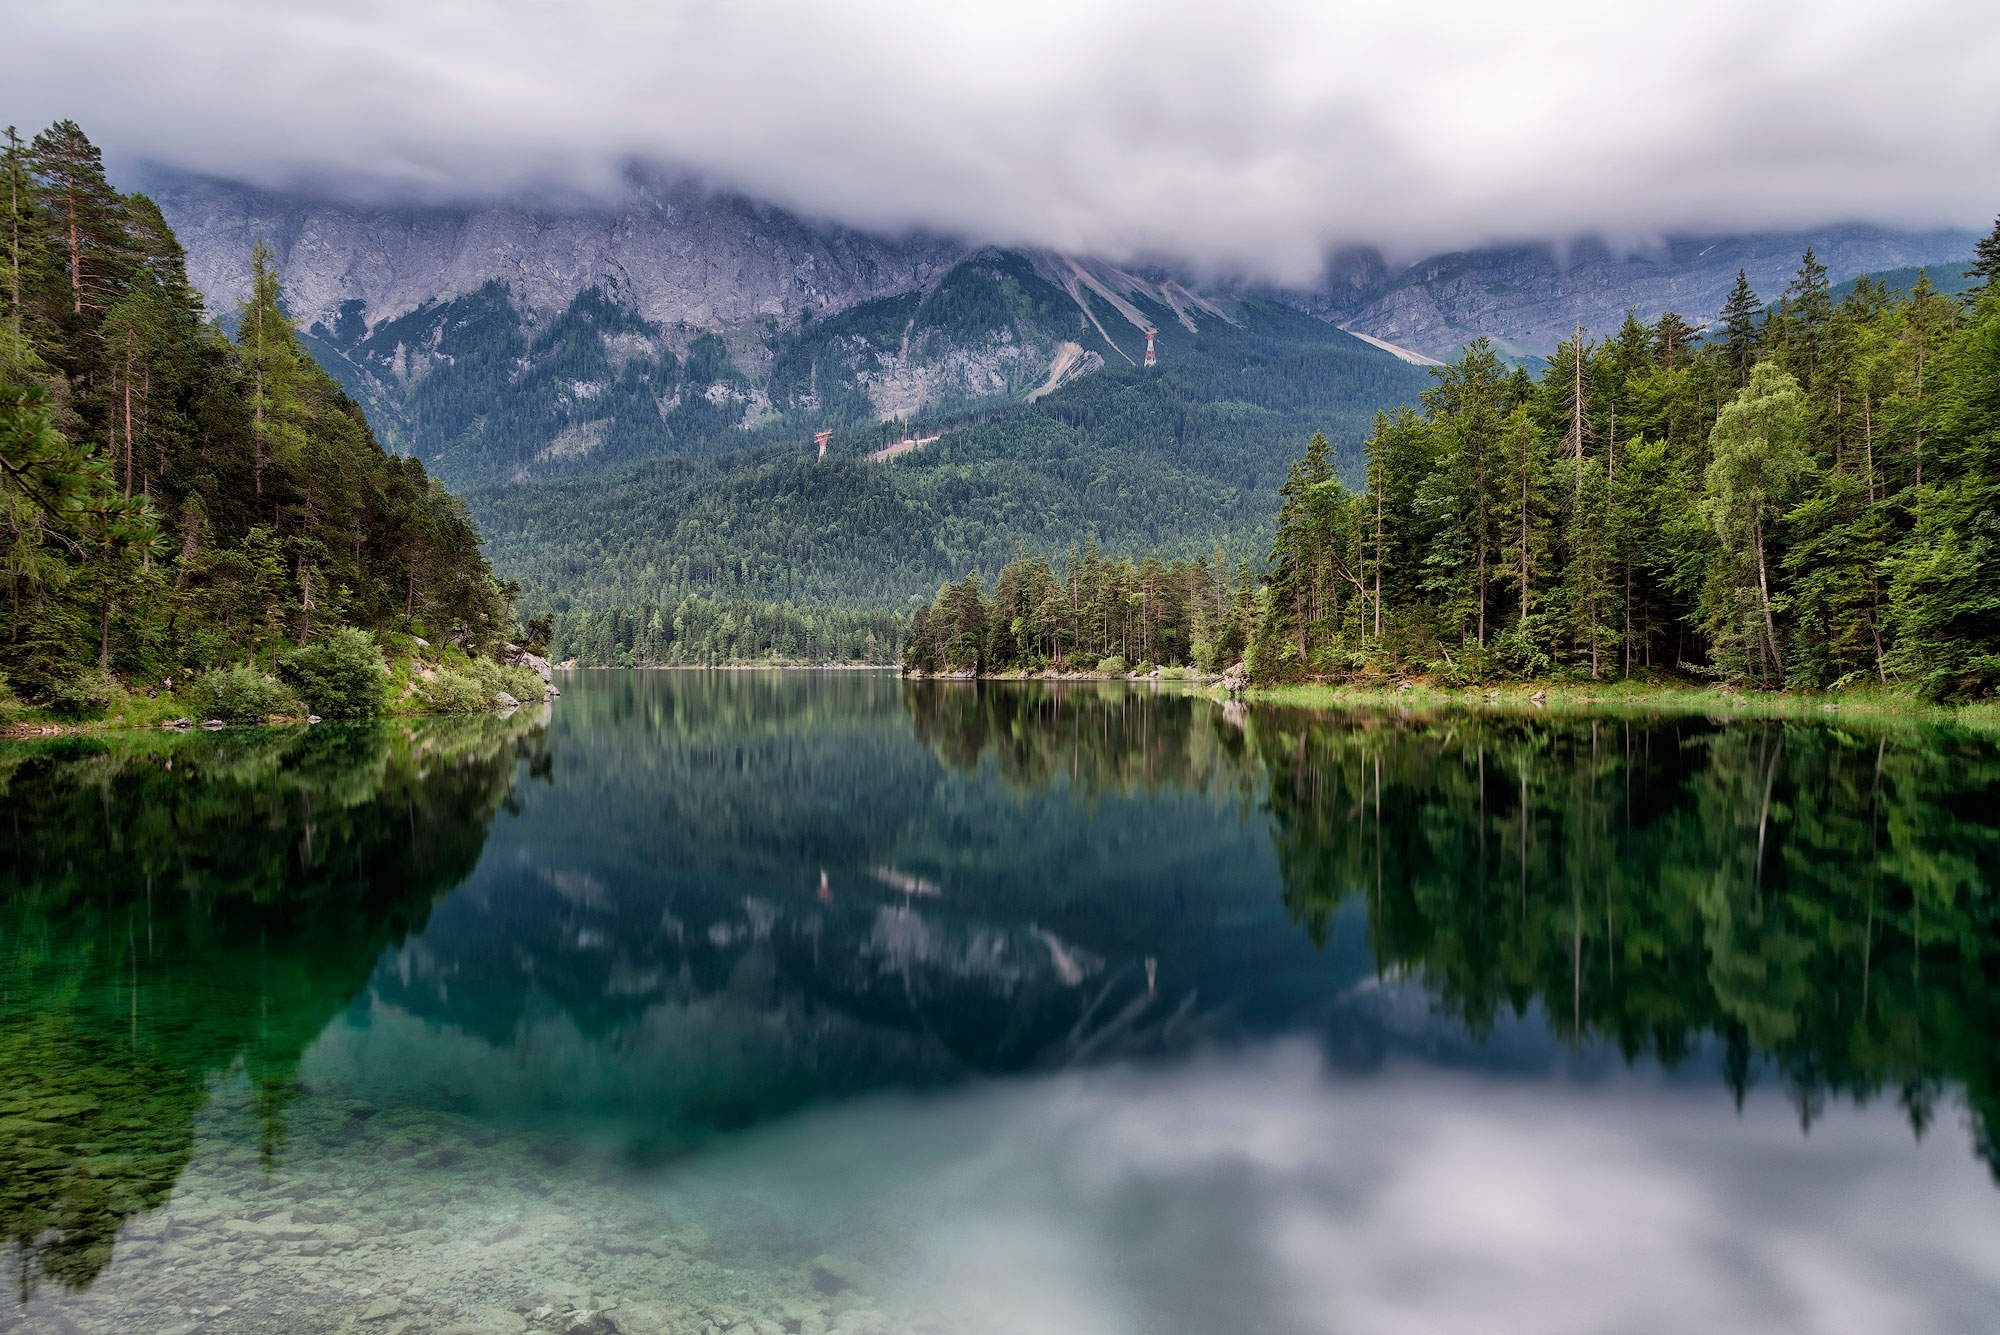 General 2000x1335 photography landscape nature overcast lake reflection forest mountains summer Germany